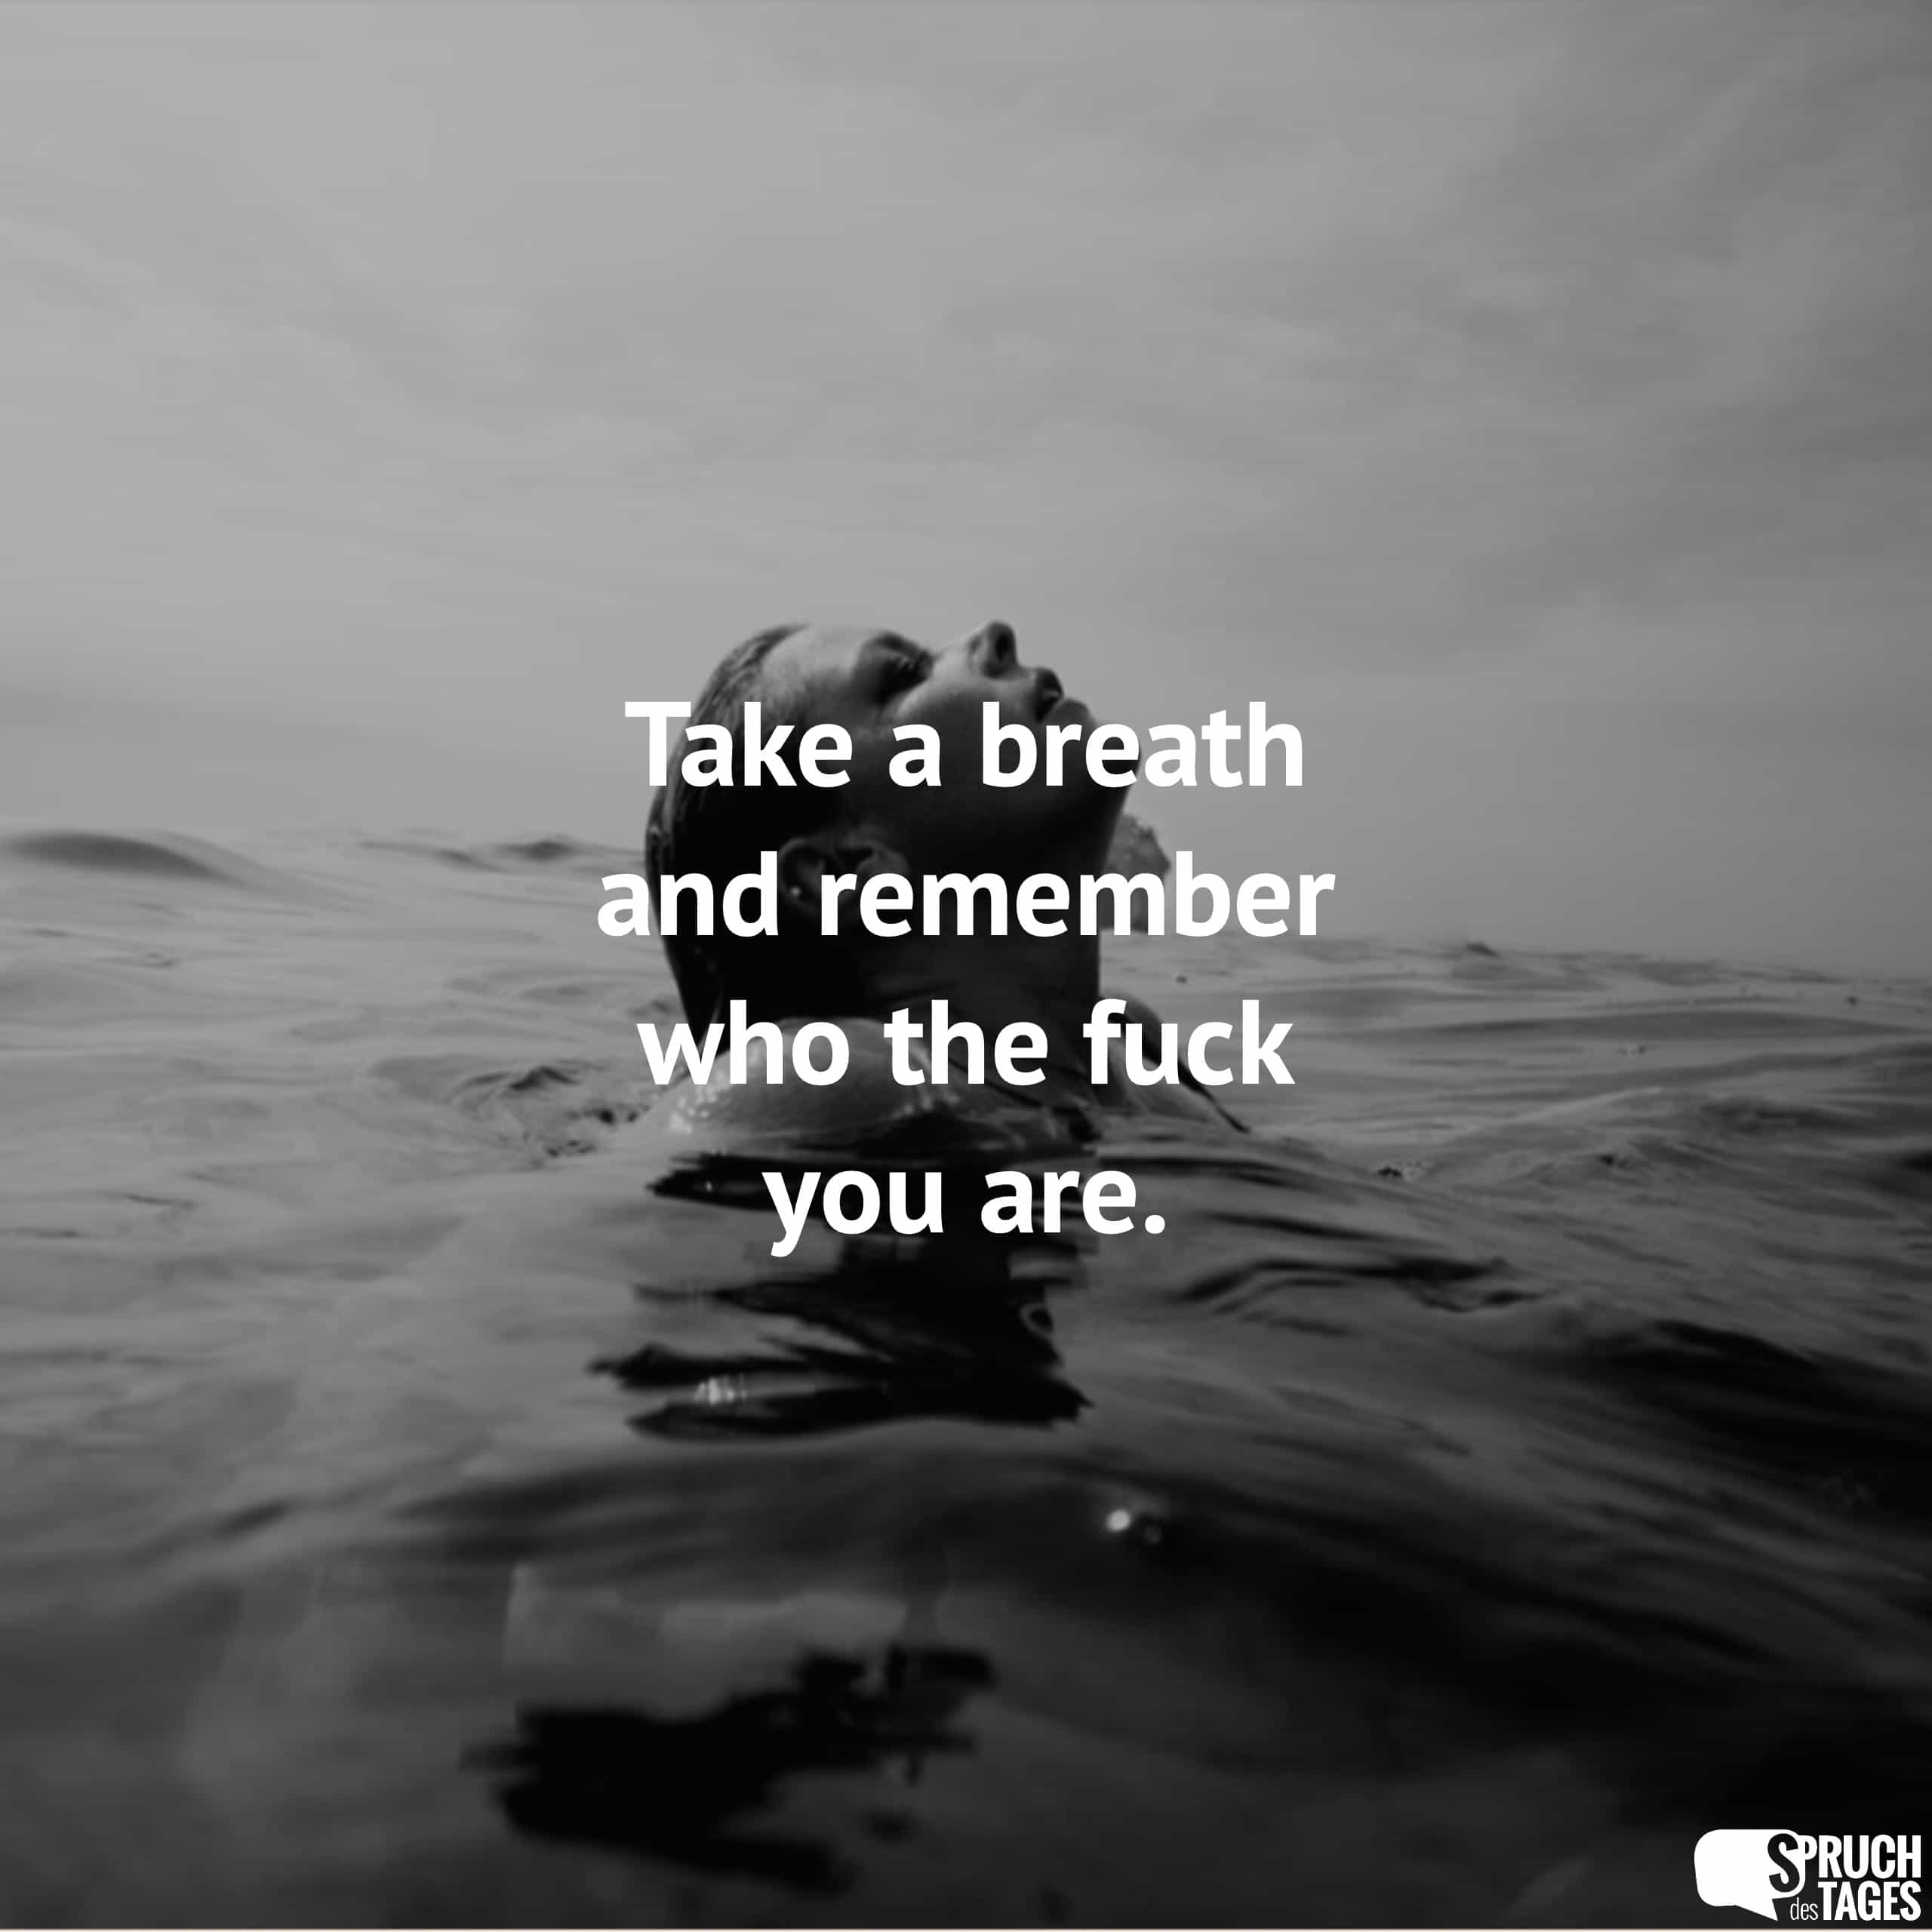 Take a breath and remember who the fuck you are.